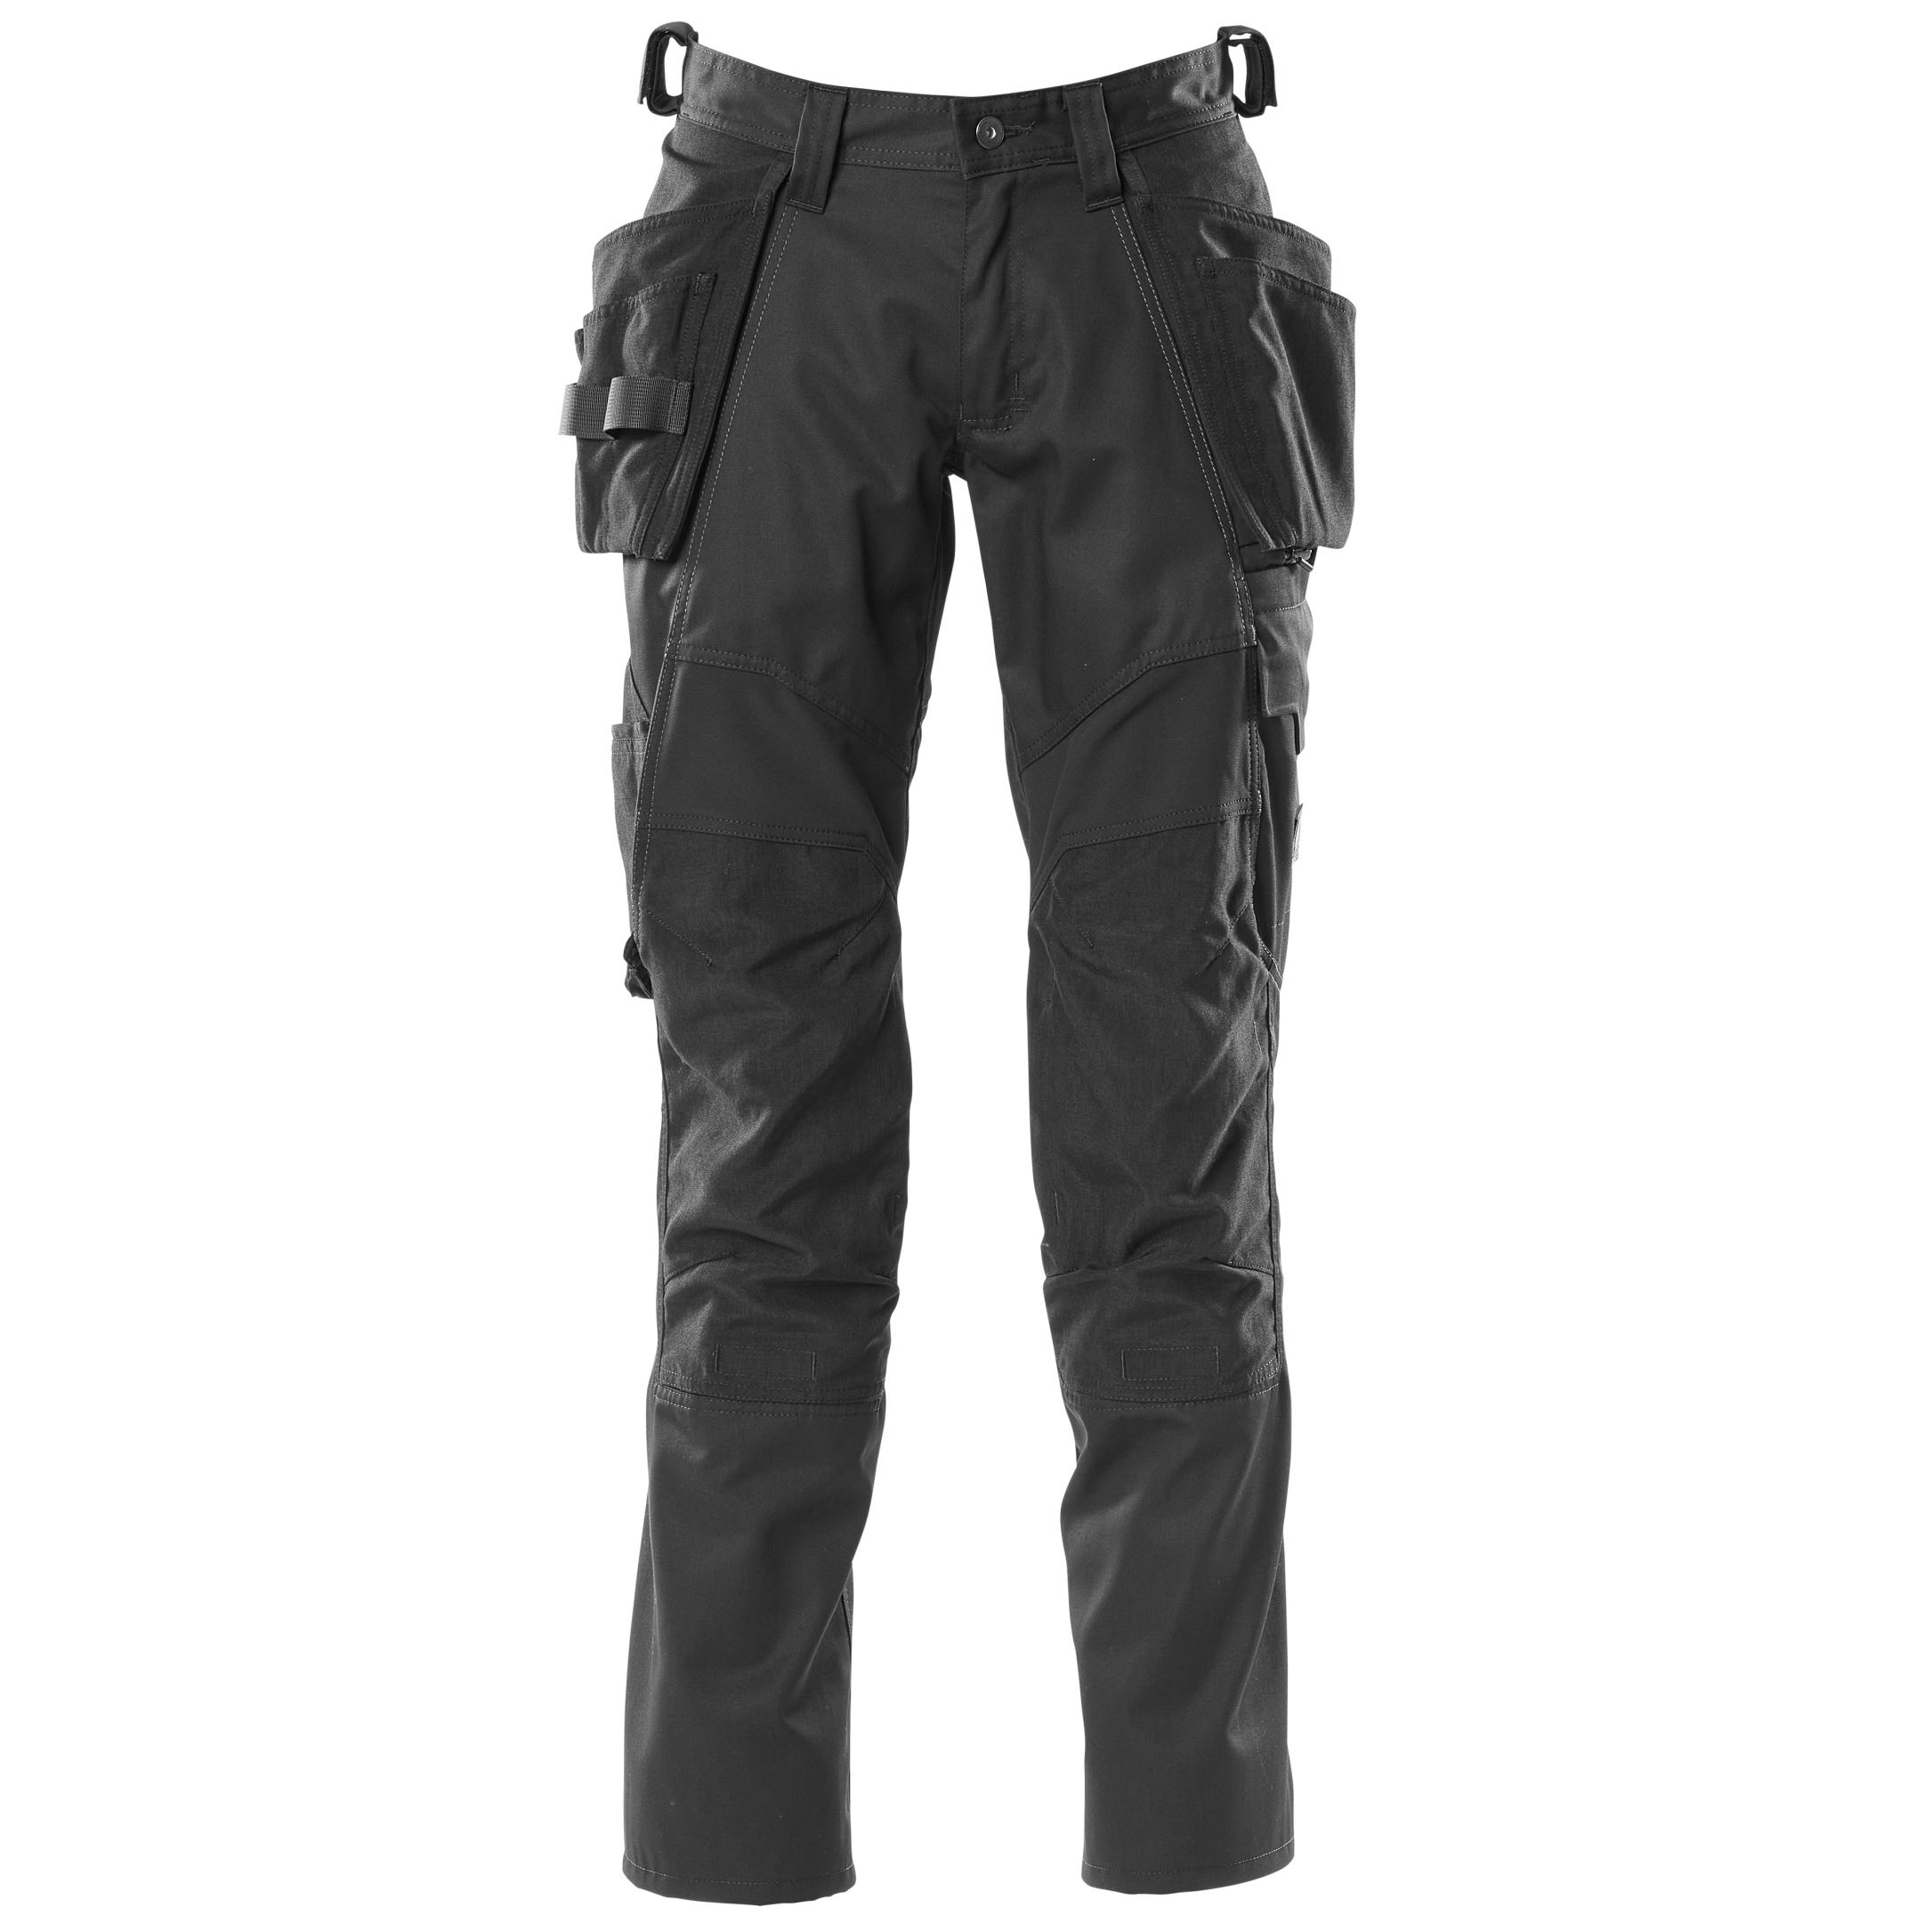 Mascot Work Trousers - 5 of the best reviewed – workweargurus.com